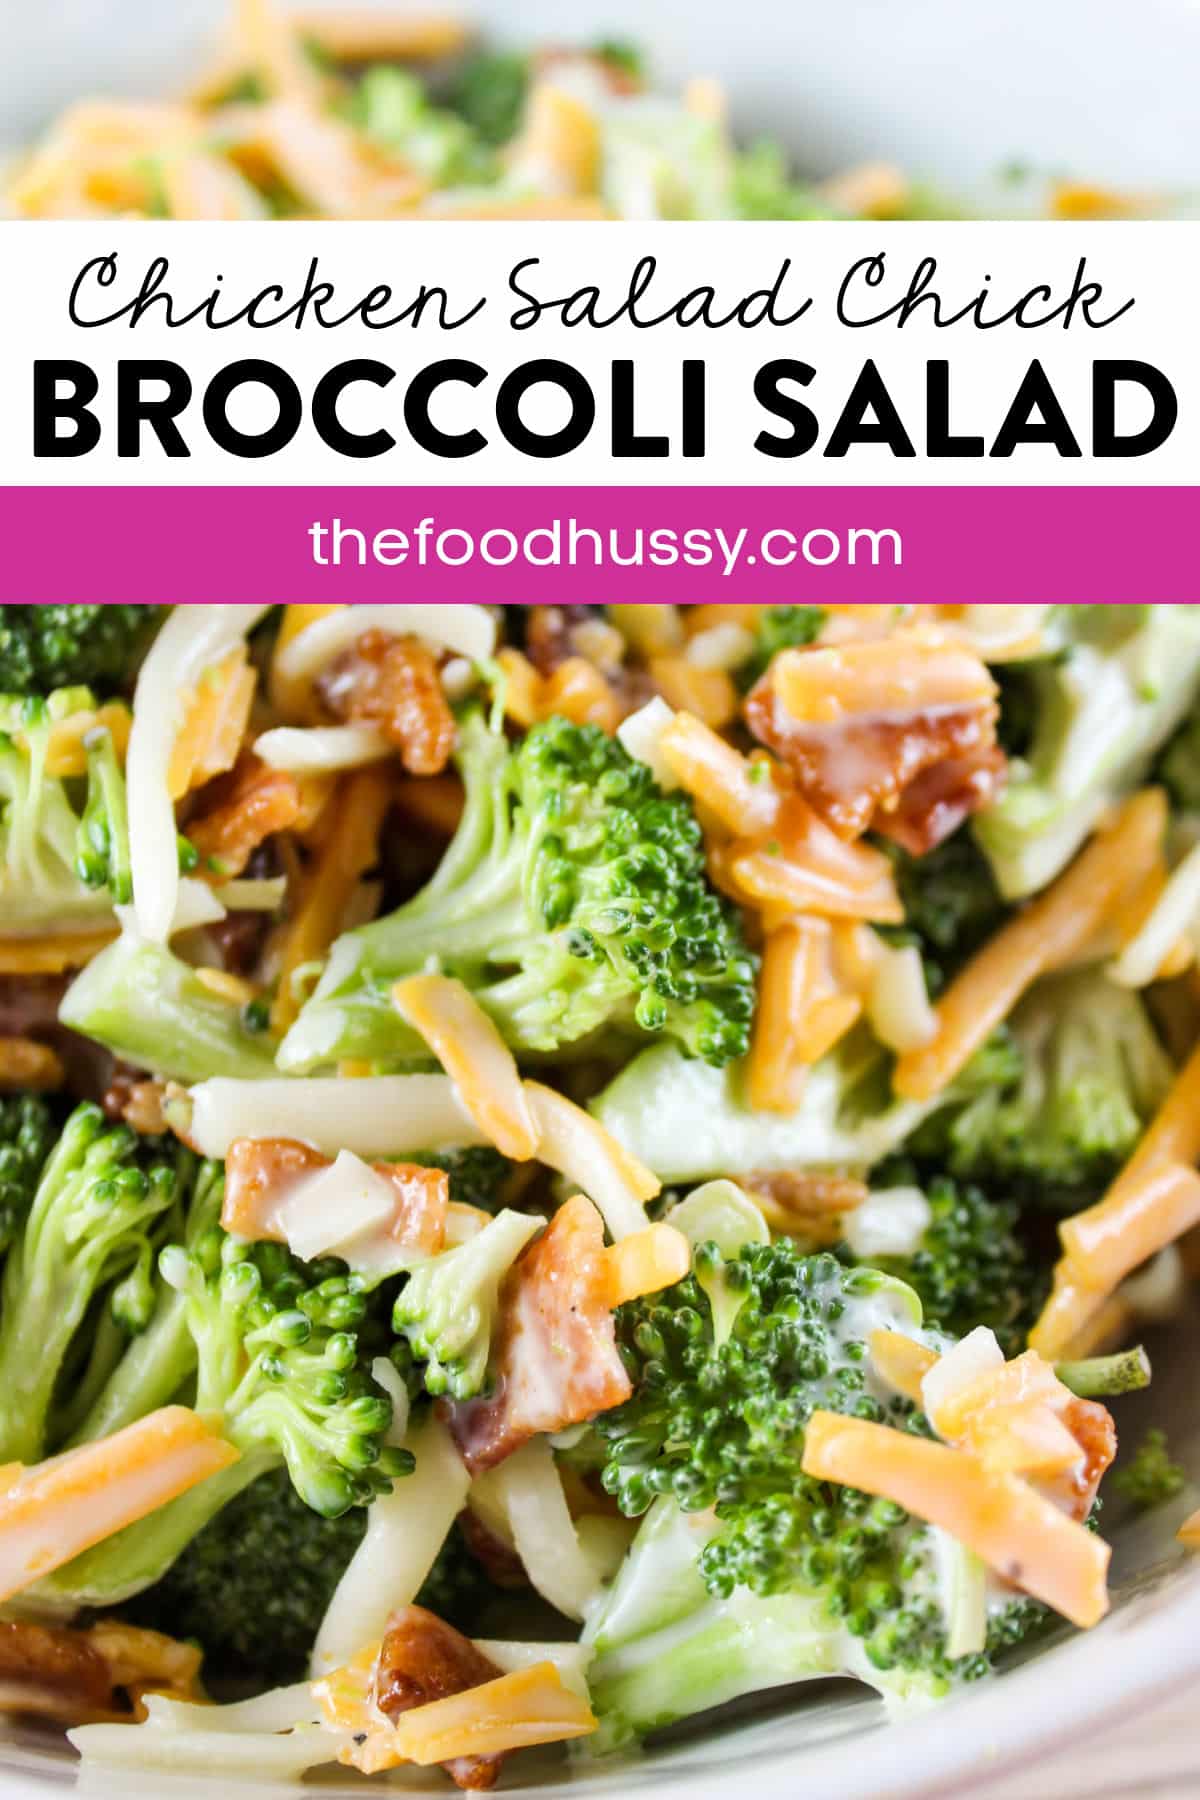 Chicken Salad Chick Broccoli Salad is my favorite restaurant side dish! It's crunchy, creamy, cheesy and bacon-y! How can you ask for anything better? This make-at-home recipe makes enough for the whole family and is the perfect dish for a potluck! via @foodhussy